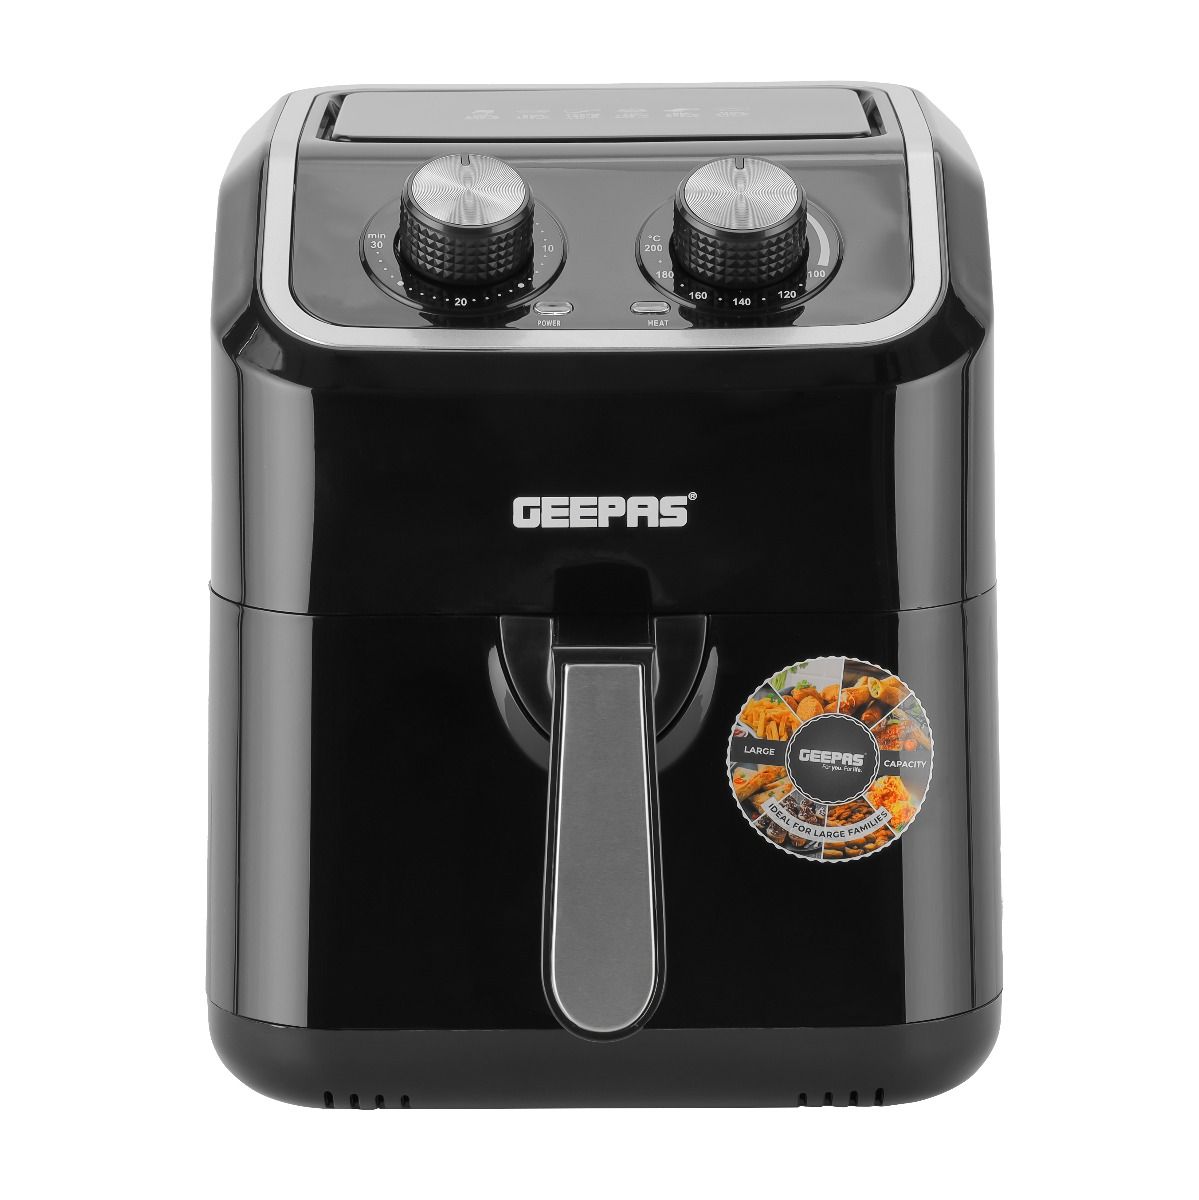 Geepas Air Fryer GAF37528 1600W, 5L Capacity With A Rack | Adjustable Timer And Temperature